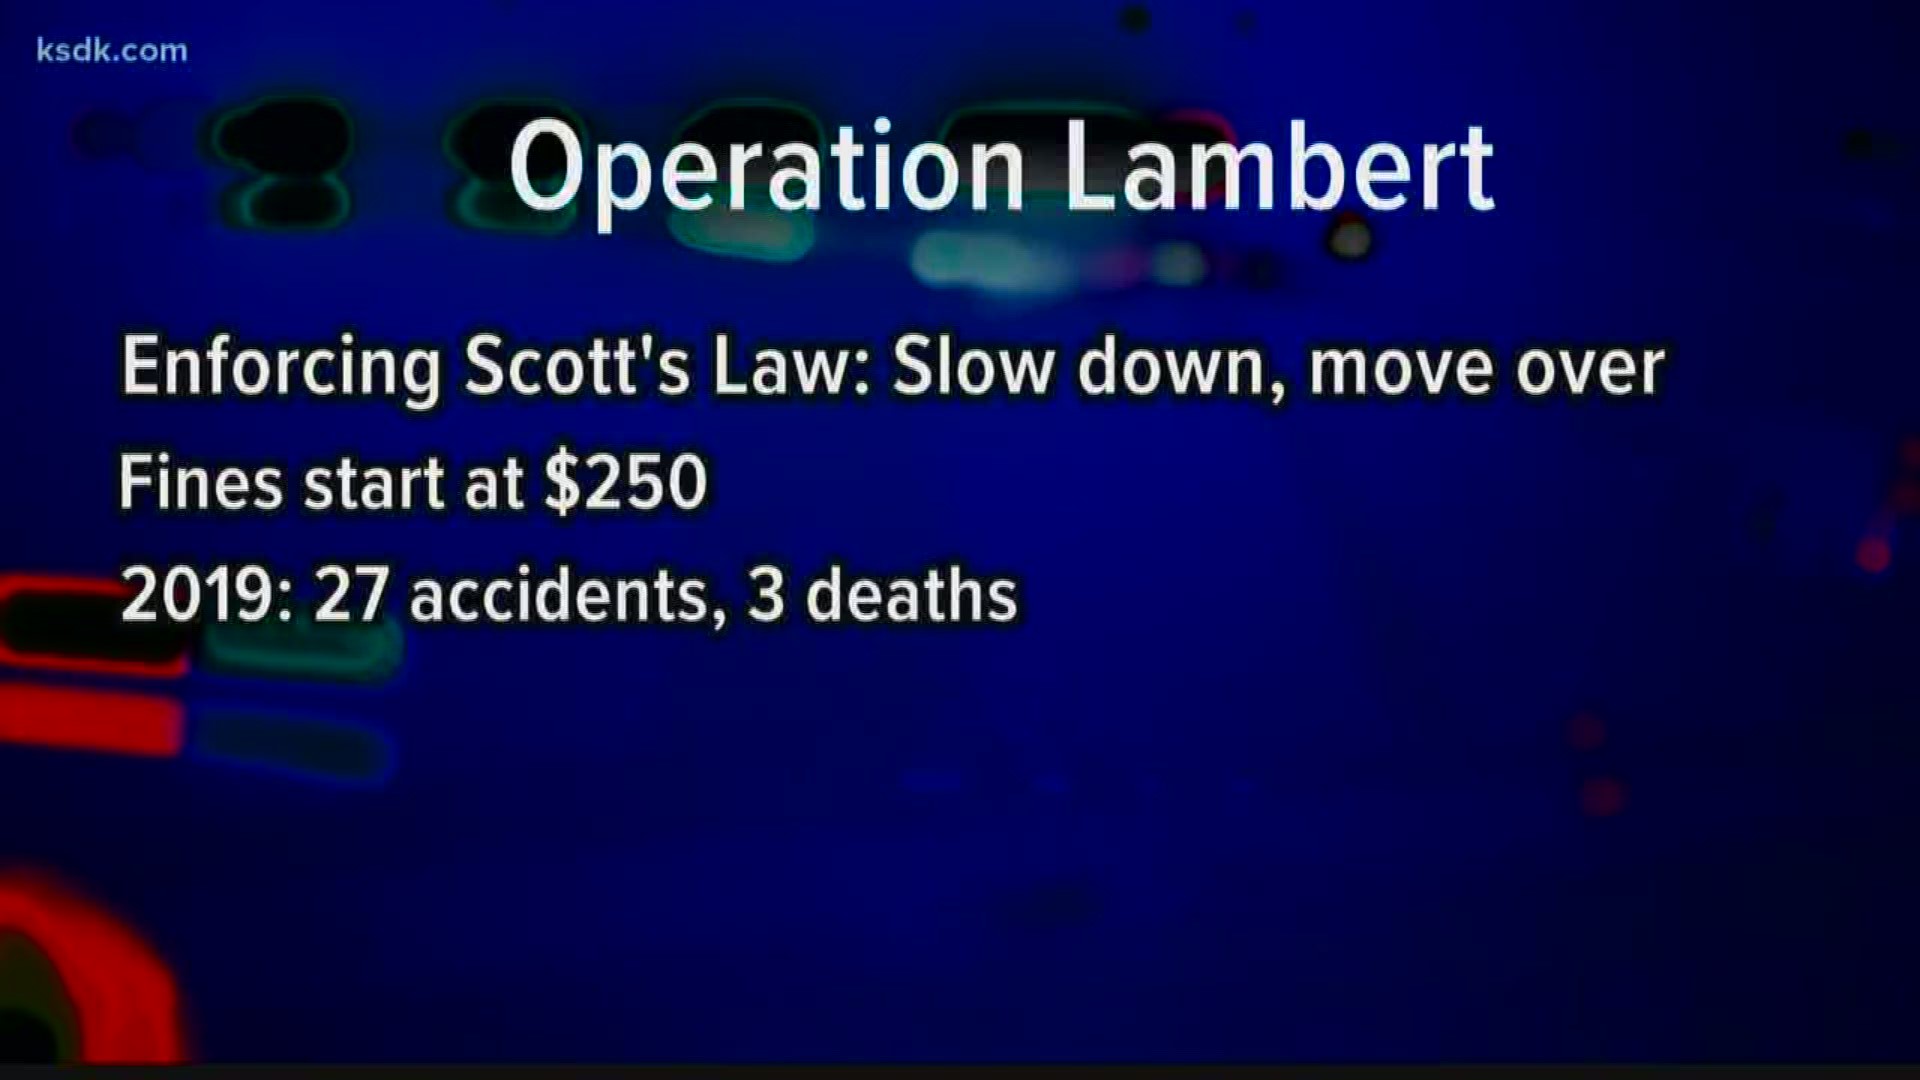 ISP will be enforcing Scott’s Law this week with a special focus called Operation Lambert. It’s a reminder for drivers to slow down near emergency responders.